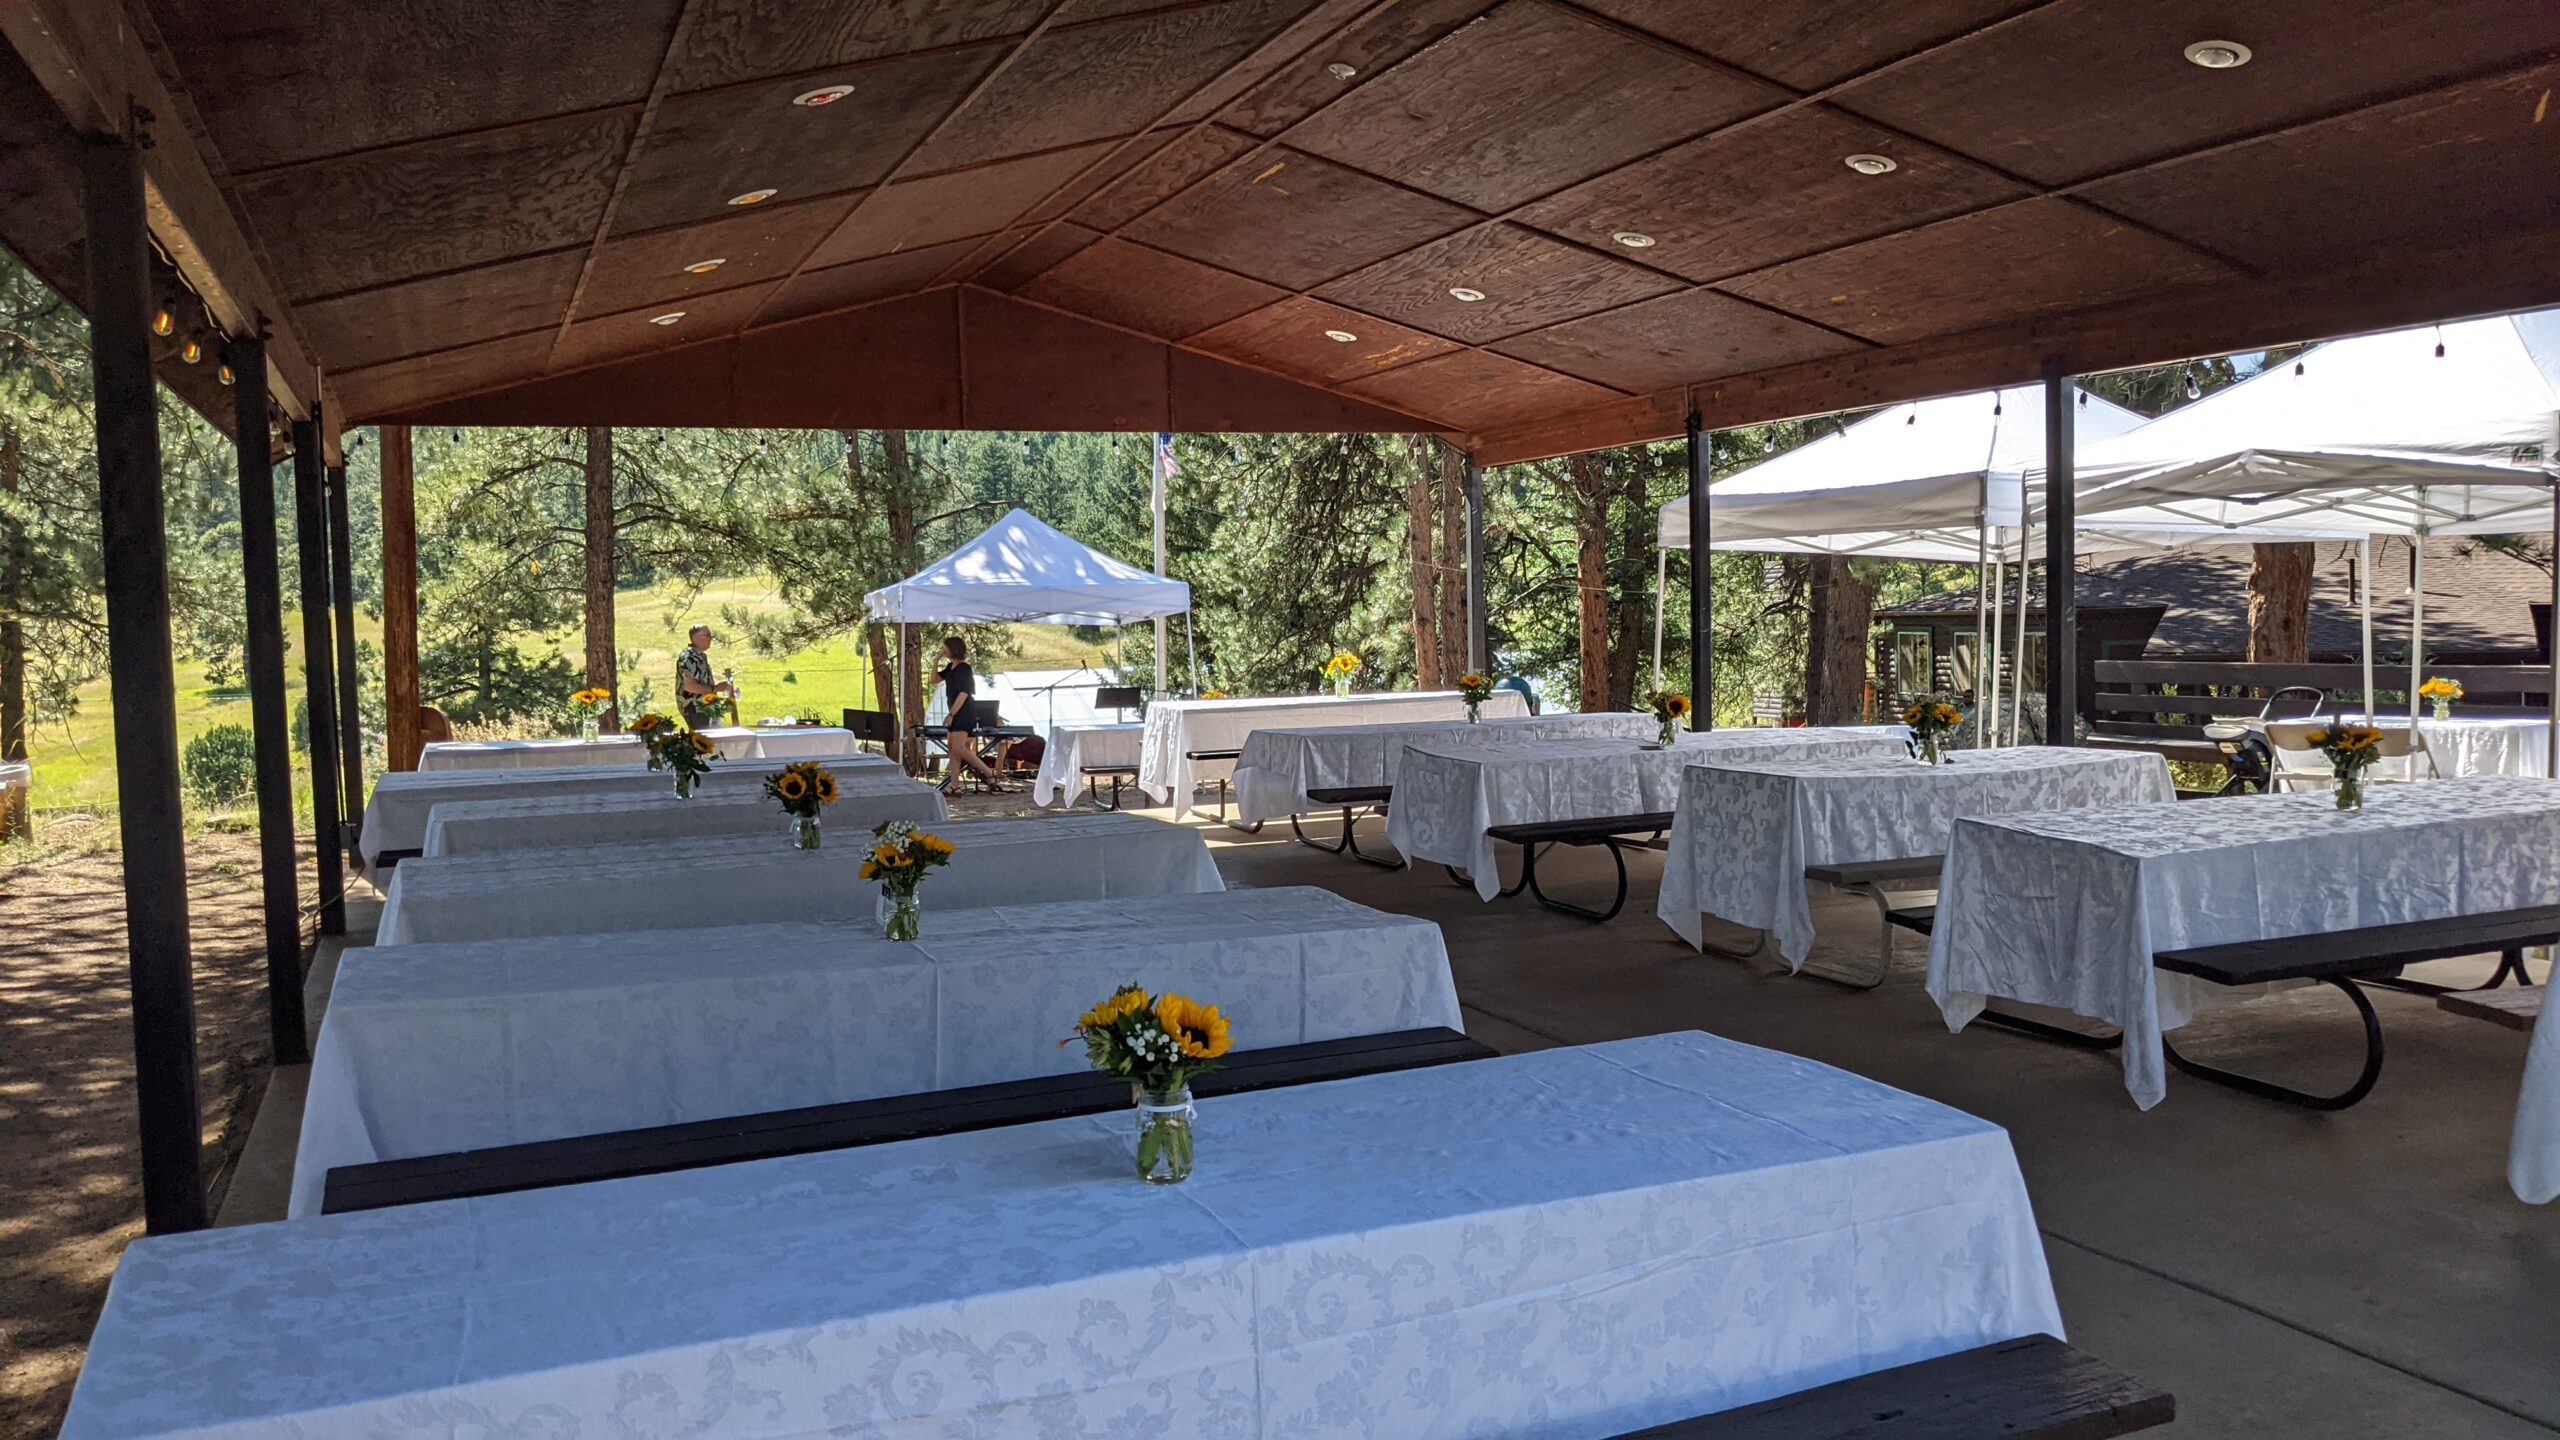 The picnic pavilion, seen here dressed in white linen tablecloths, is an open-air feature of the Long Scraggy retreat facility